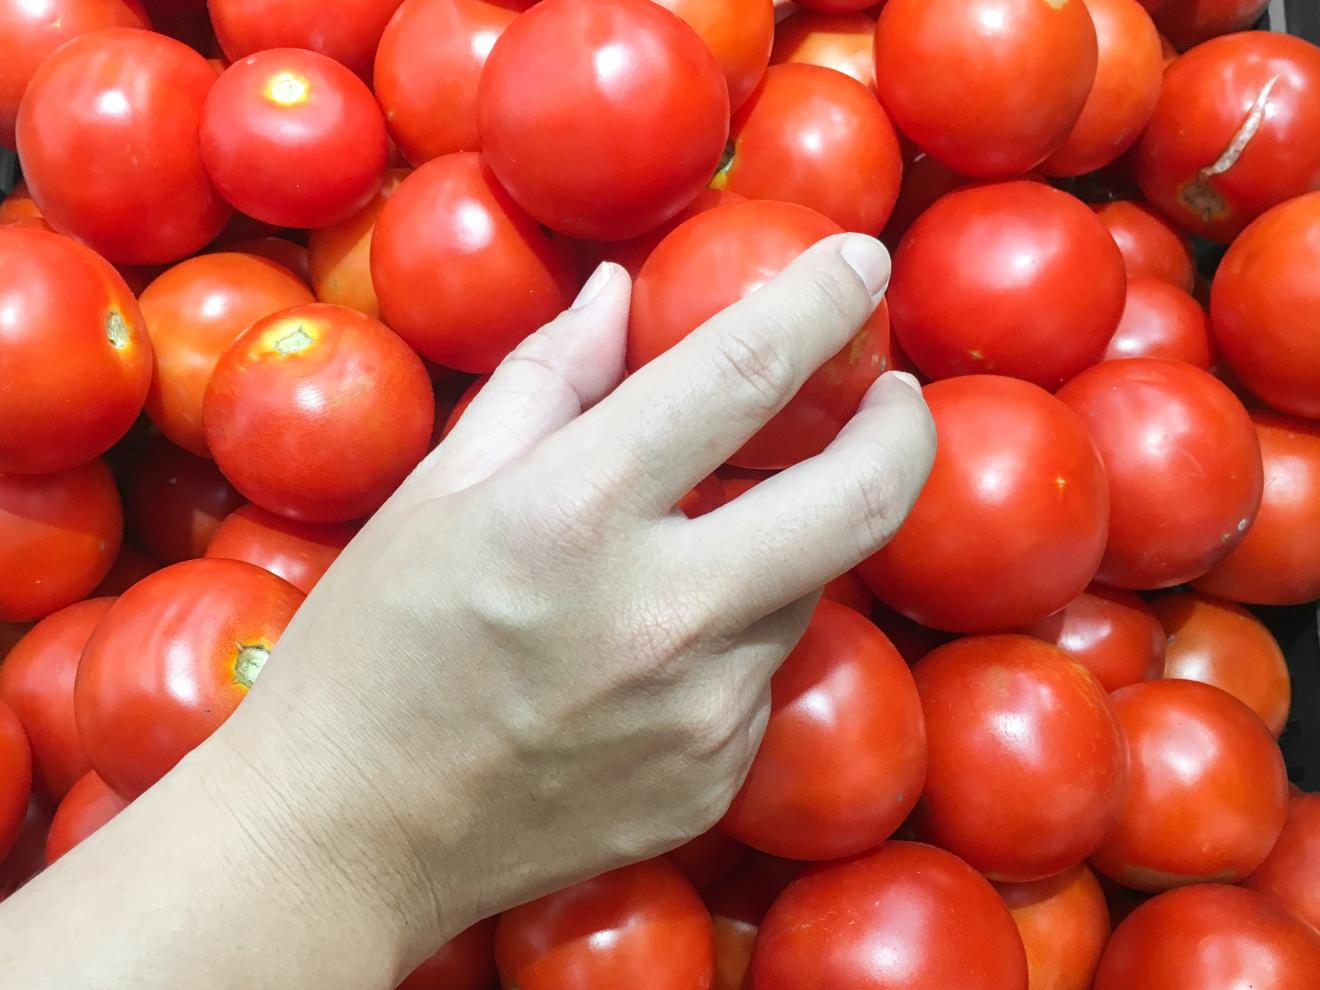 An aerial close-up of a hand choosing a red tomato from a box of many